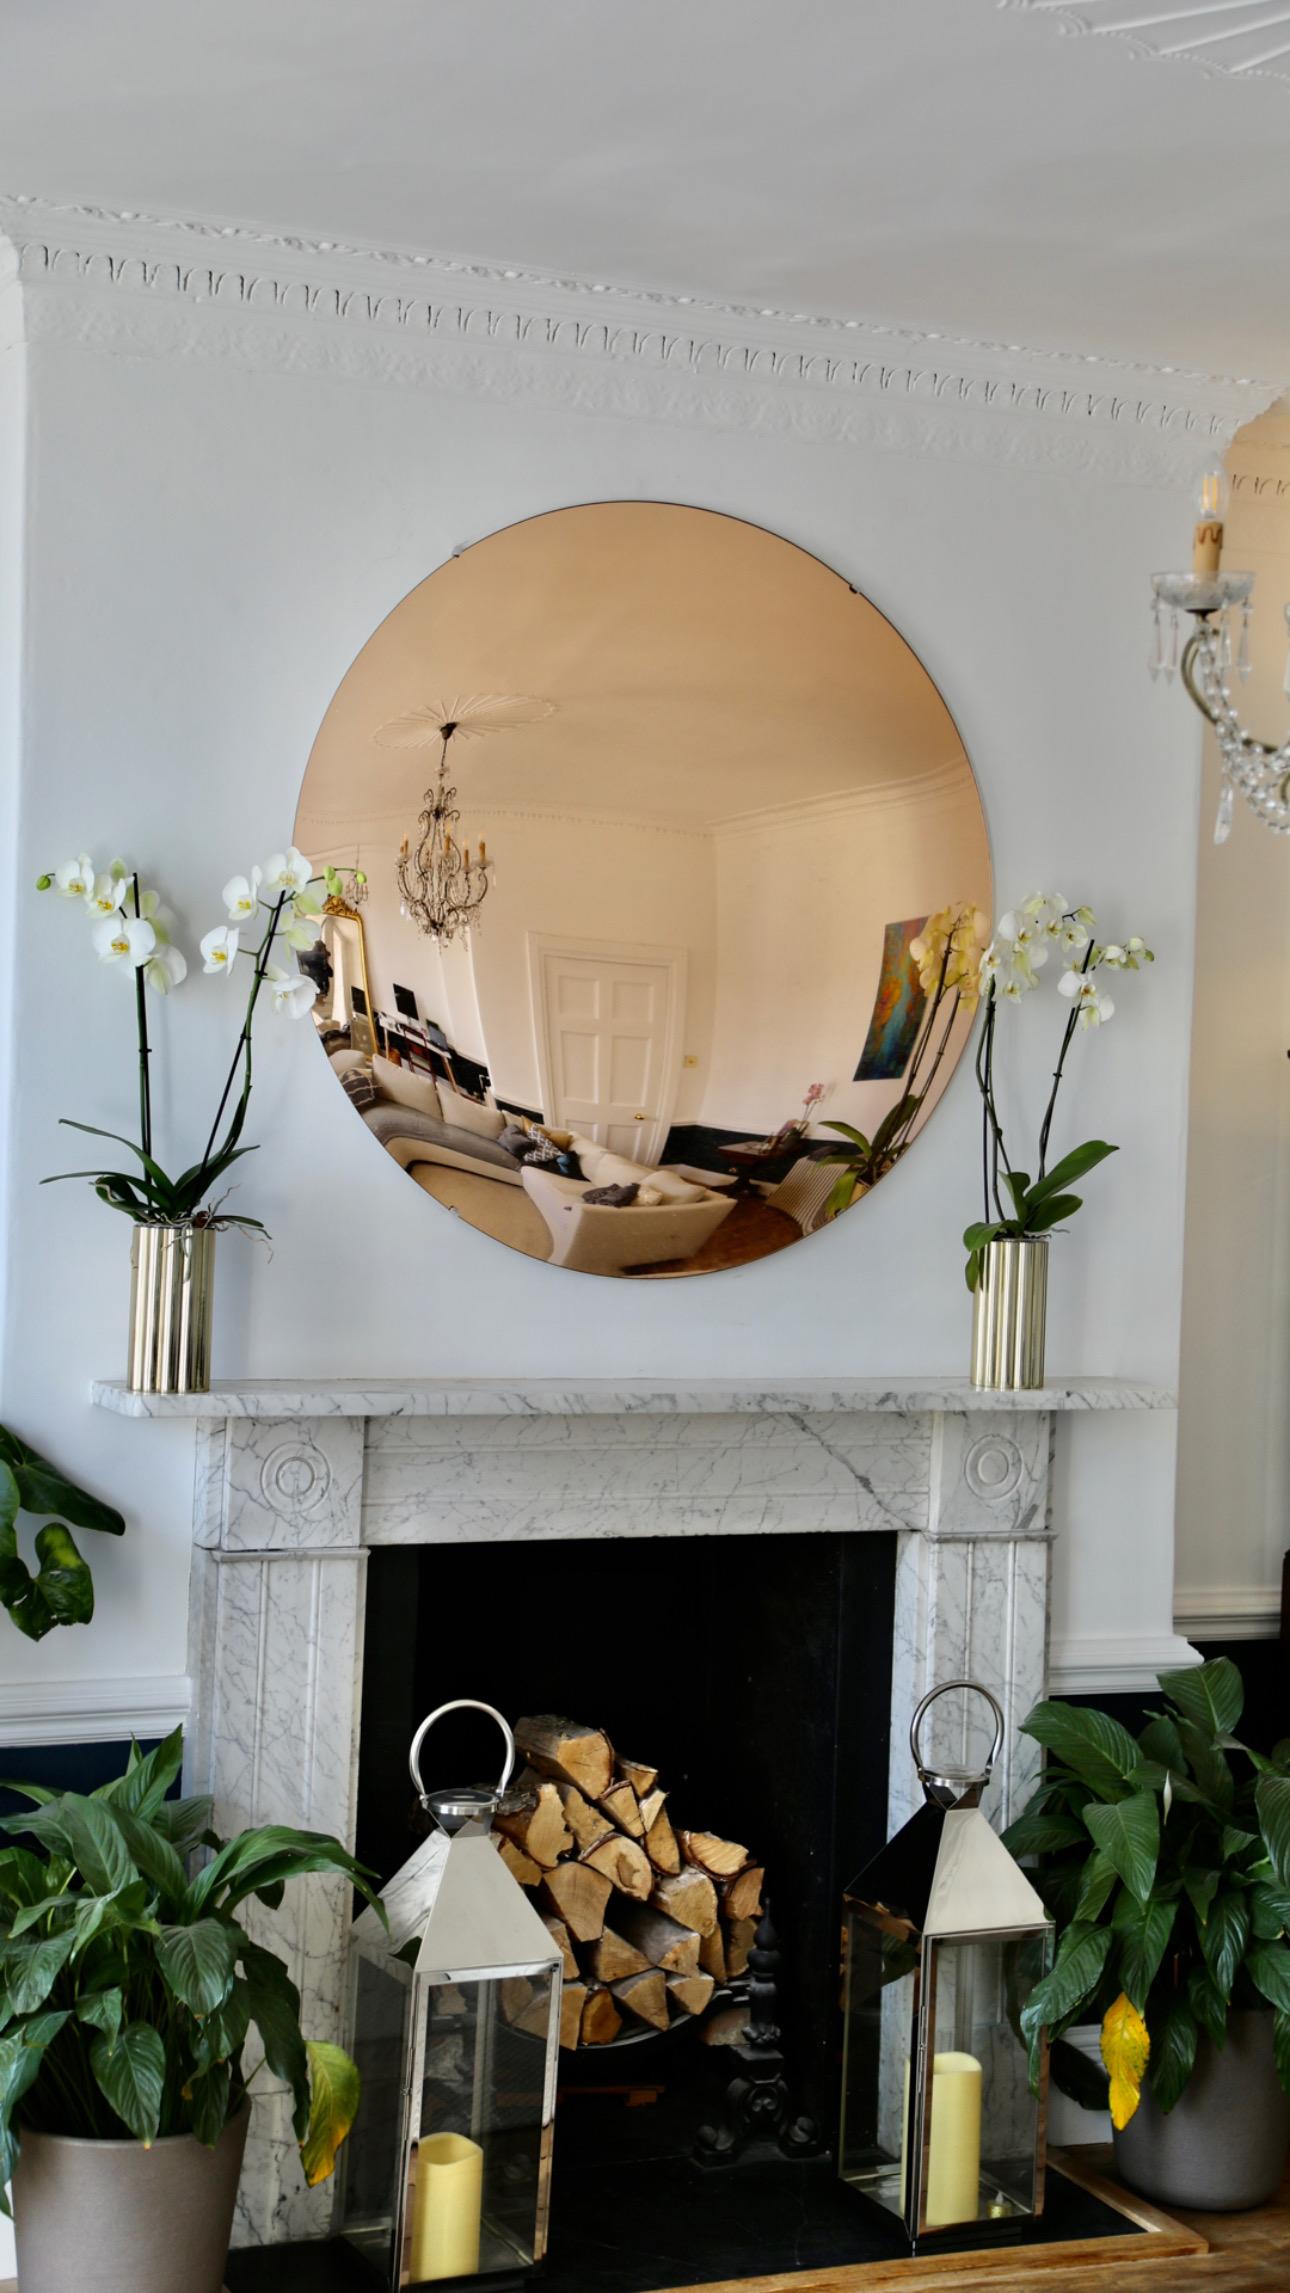 The Ravello 150 cm rose gold glass convex wall mirror is fabricated from 6mm low iron glass for extra clarity. 

The mirror is 150 cms in diameter and held in position with four matching wall fixings. The projection of the mirror is 8 cms.

We also